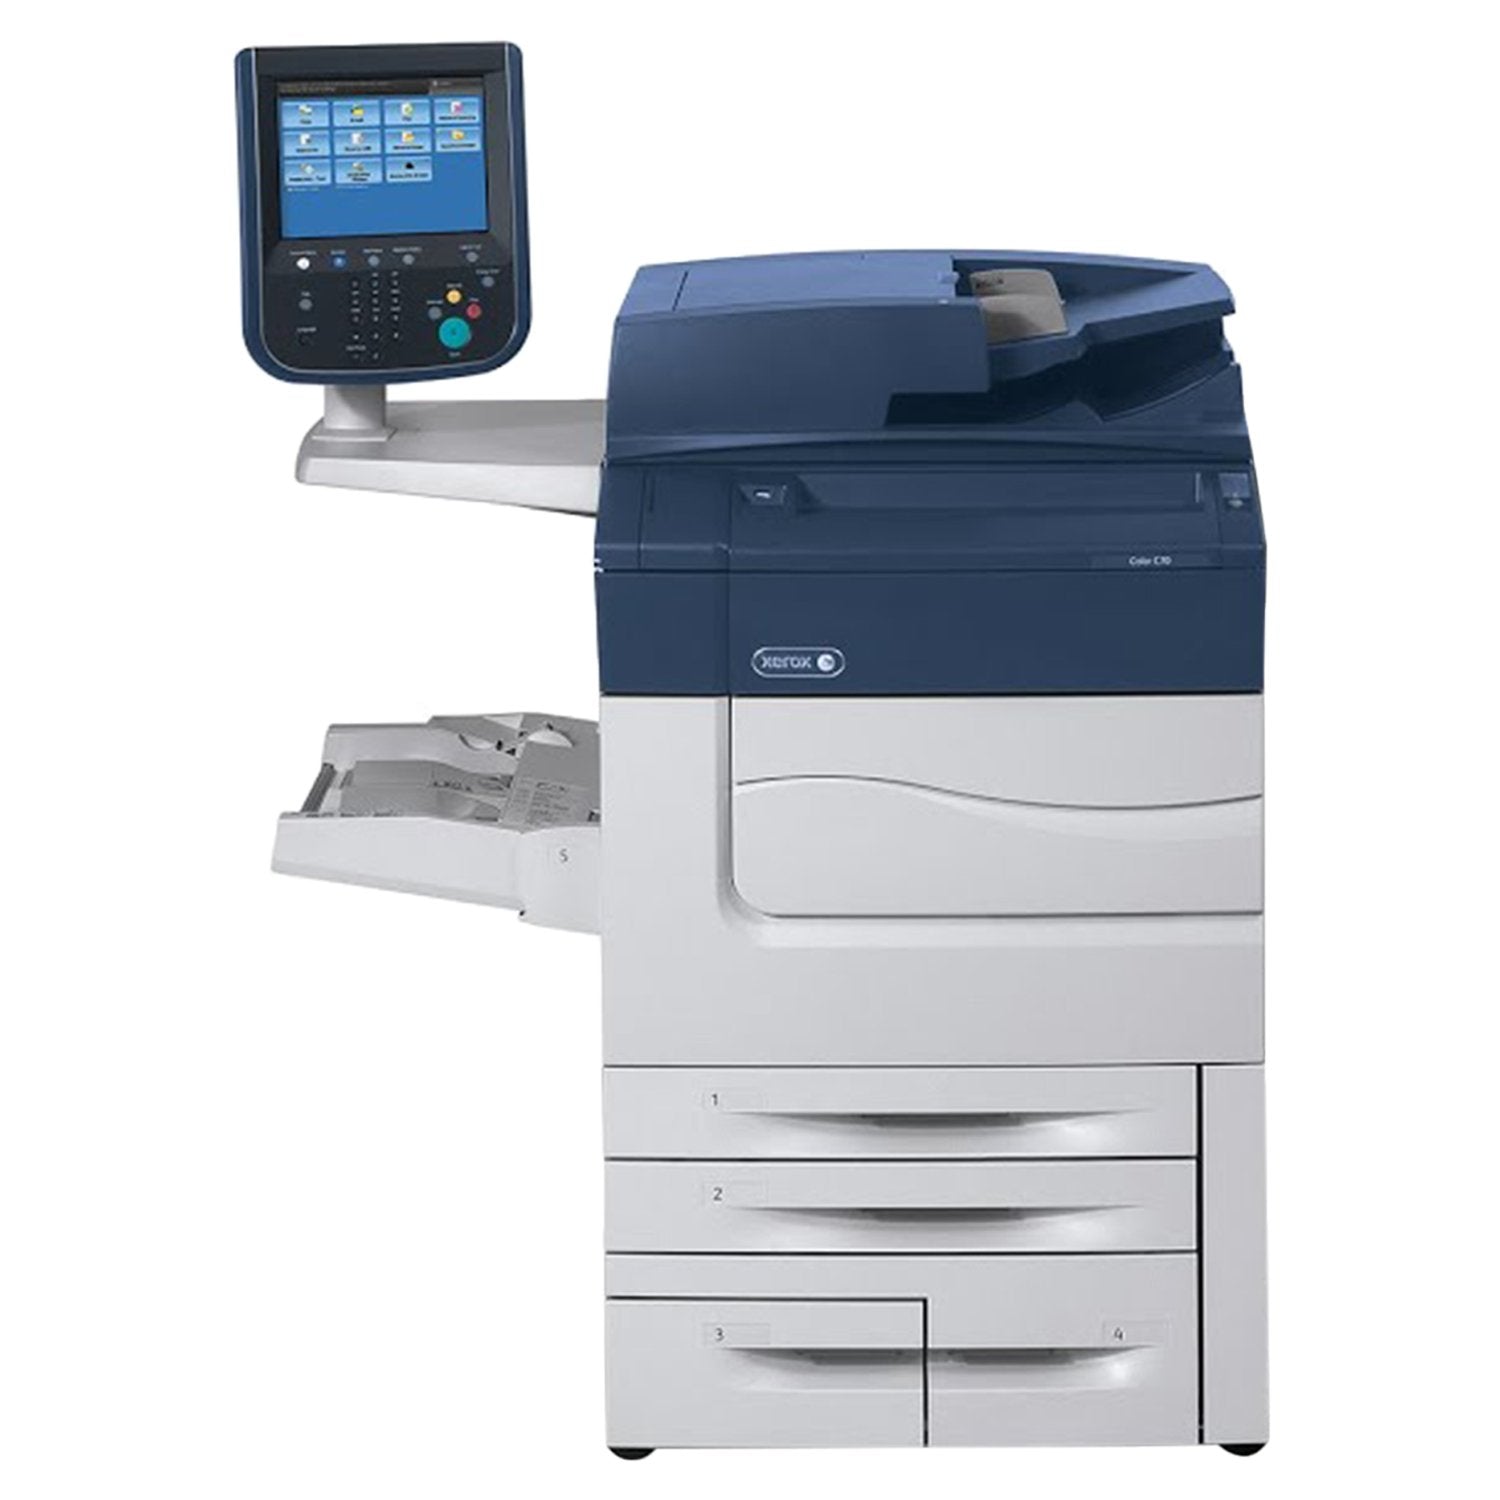 Absolute Toner $148/Month Xerox Office Color C70 Multifunction Production Laser Printer | Color MFP With Support For 13 x 19.2 in. / SRA3 Printers/Copiers